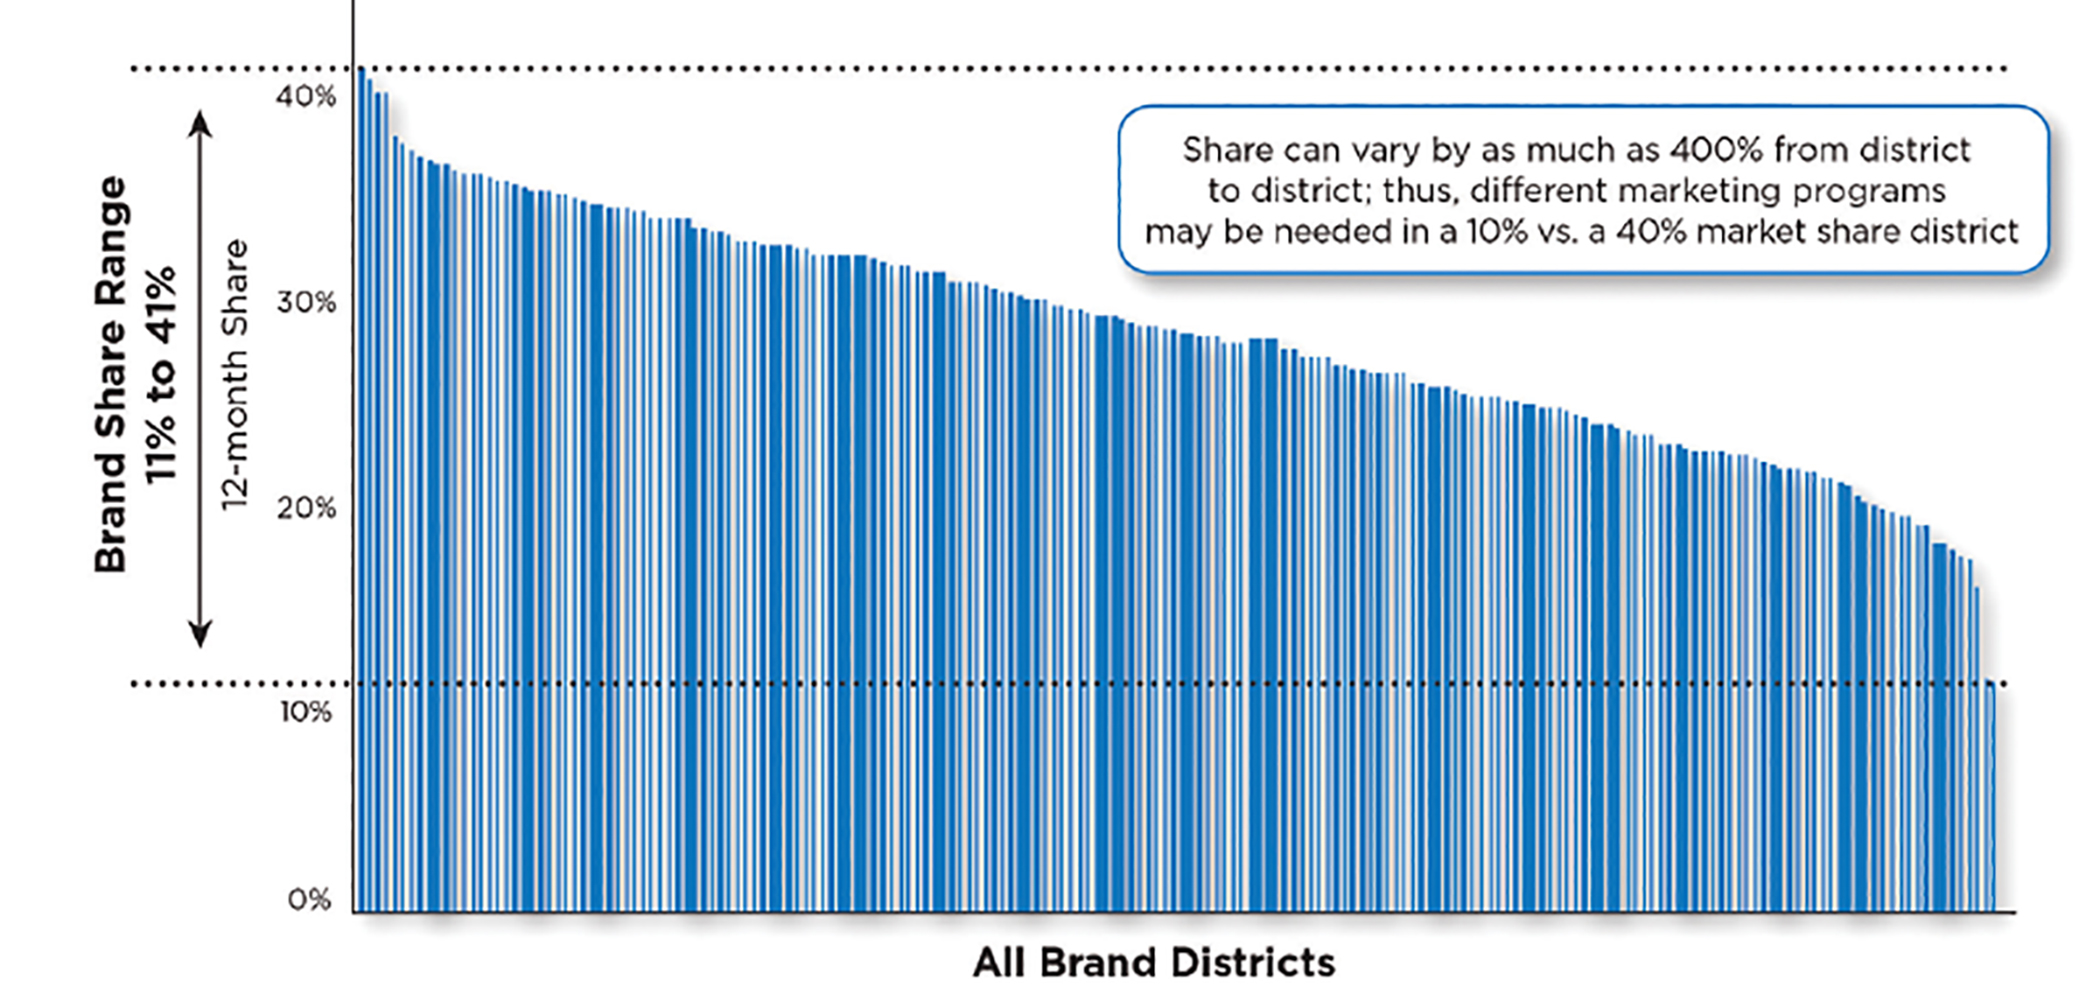 A bar graph showing many bars, too many to count, comparing all brand districts to the brand share range. A description for the graph says, "Share can vary by as much as 400% from district to district; thus, different marketing programs may be needed in a 10% vs. a 40% market share district."